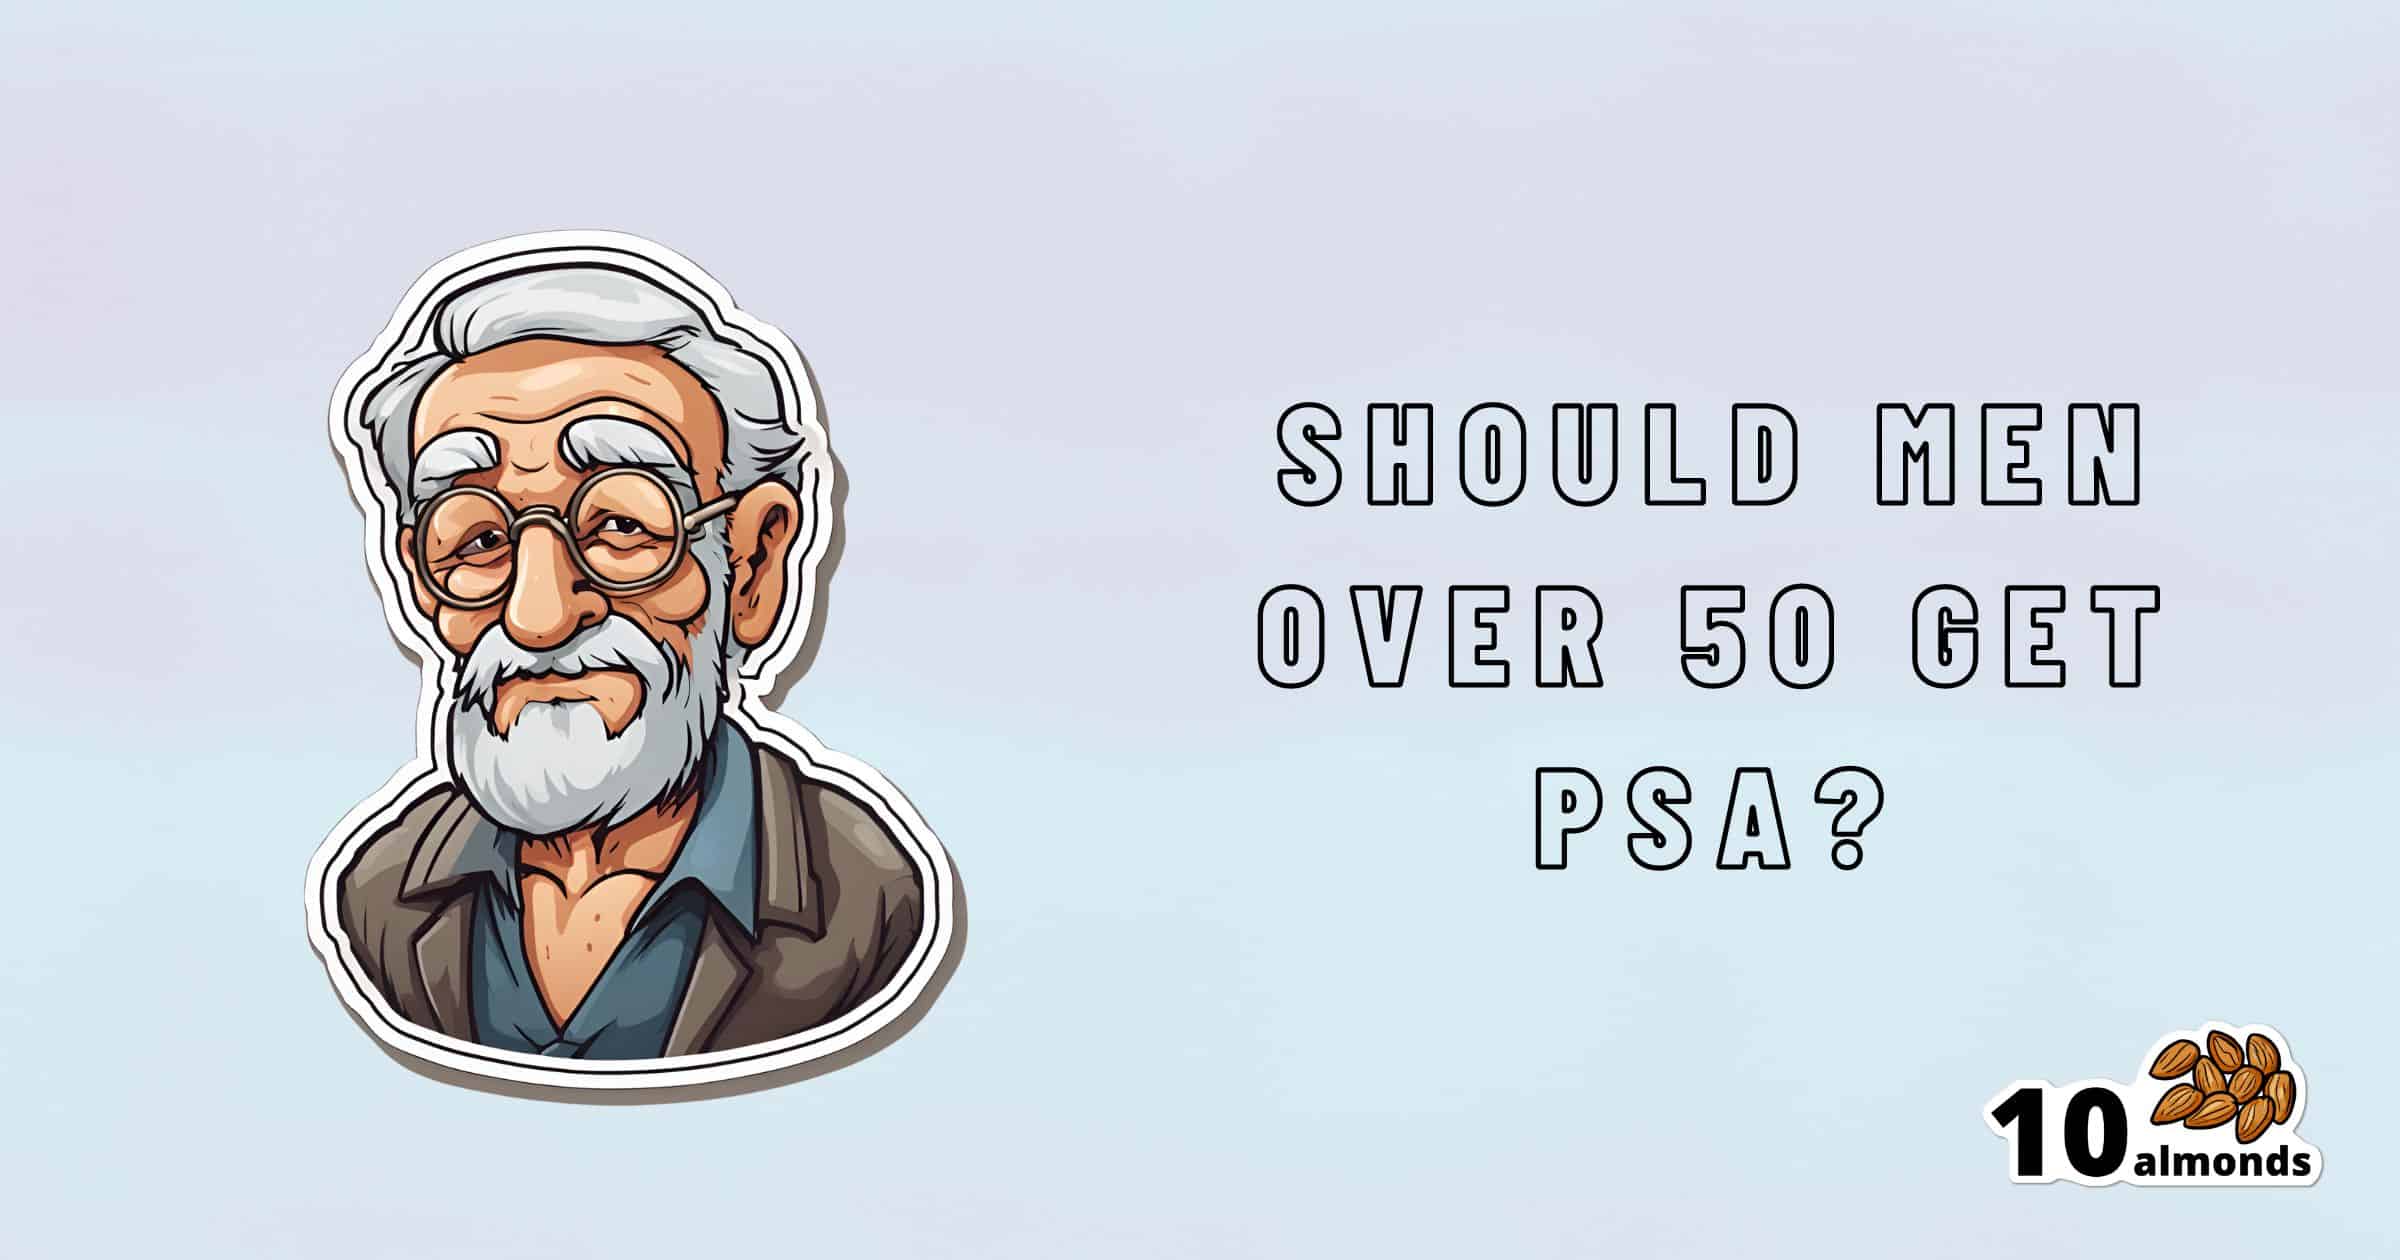 Illustration of an elderly man with glasses and a white beard on the left. Text on the right reads, "Should Men Over 50 Get a PSA?" promoting prostate health, with a "10 almonds" logo at the bottom right featuring an illustration of almonds. The background is light blue.